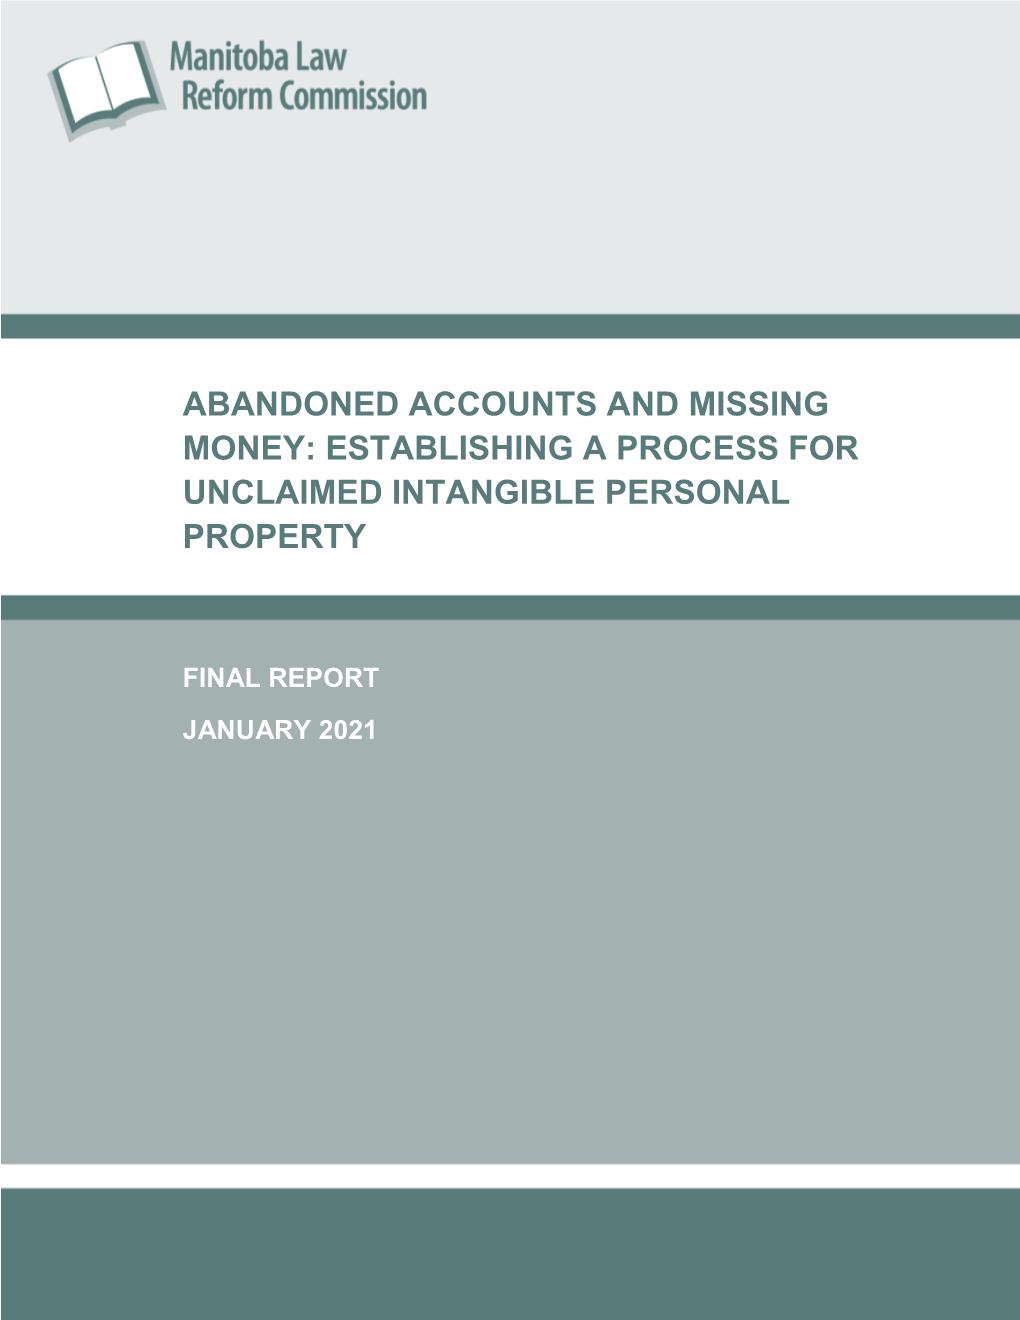 Abandoned Accounts and Missing Money: Establishing a Process for Unclaimed Intangible Personal Property